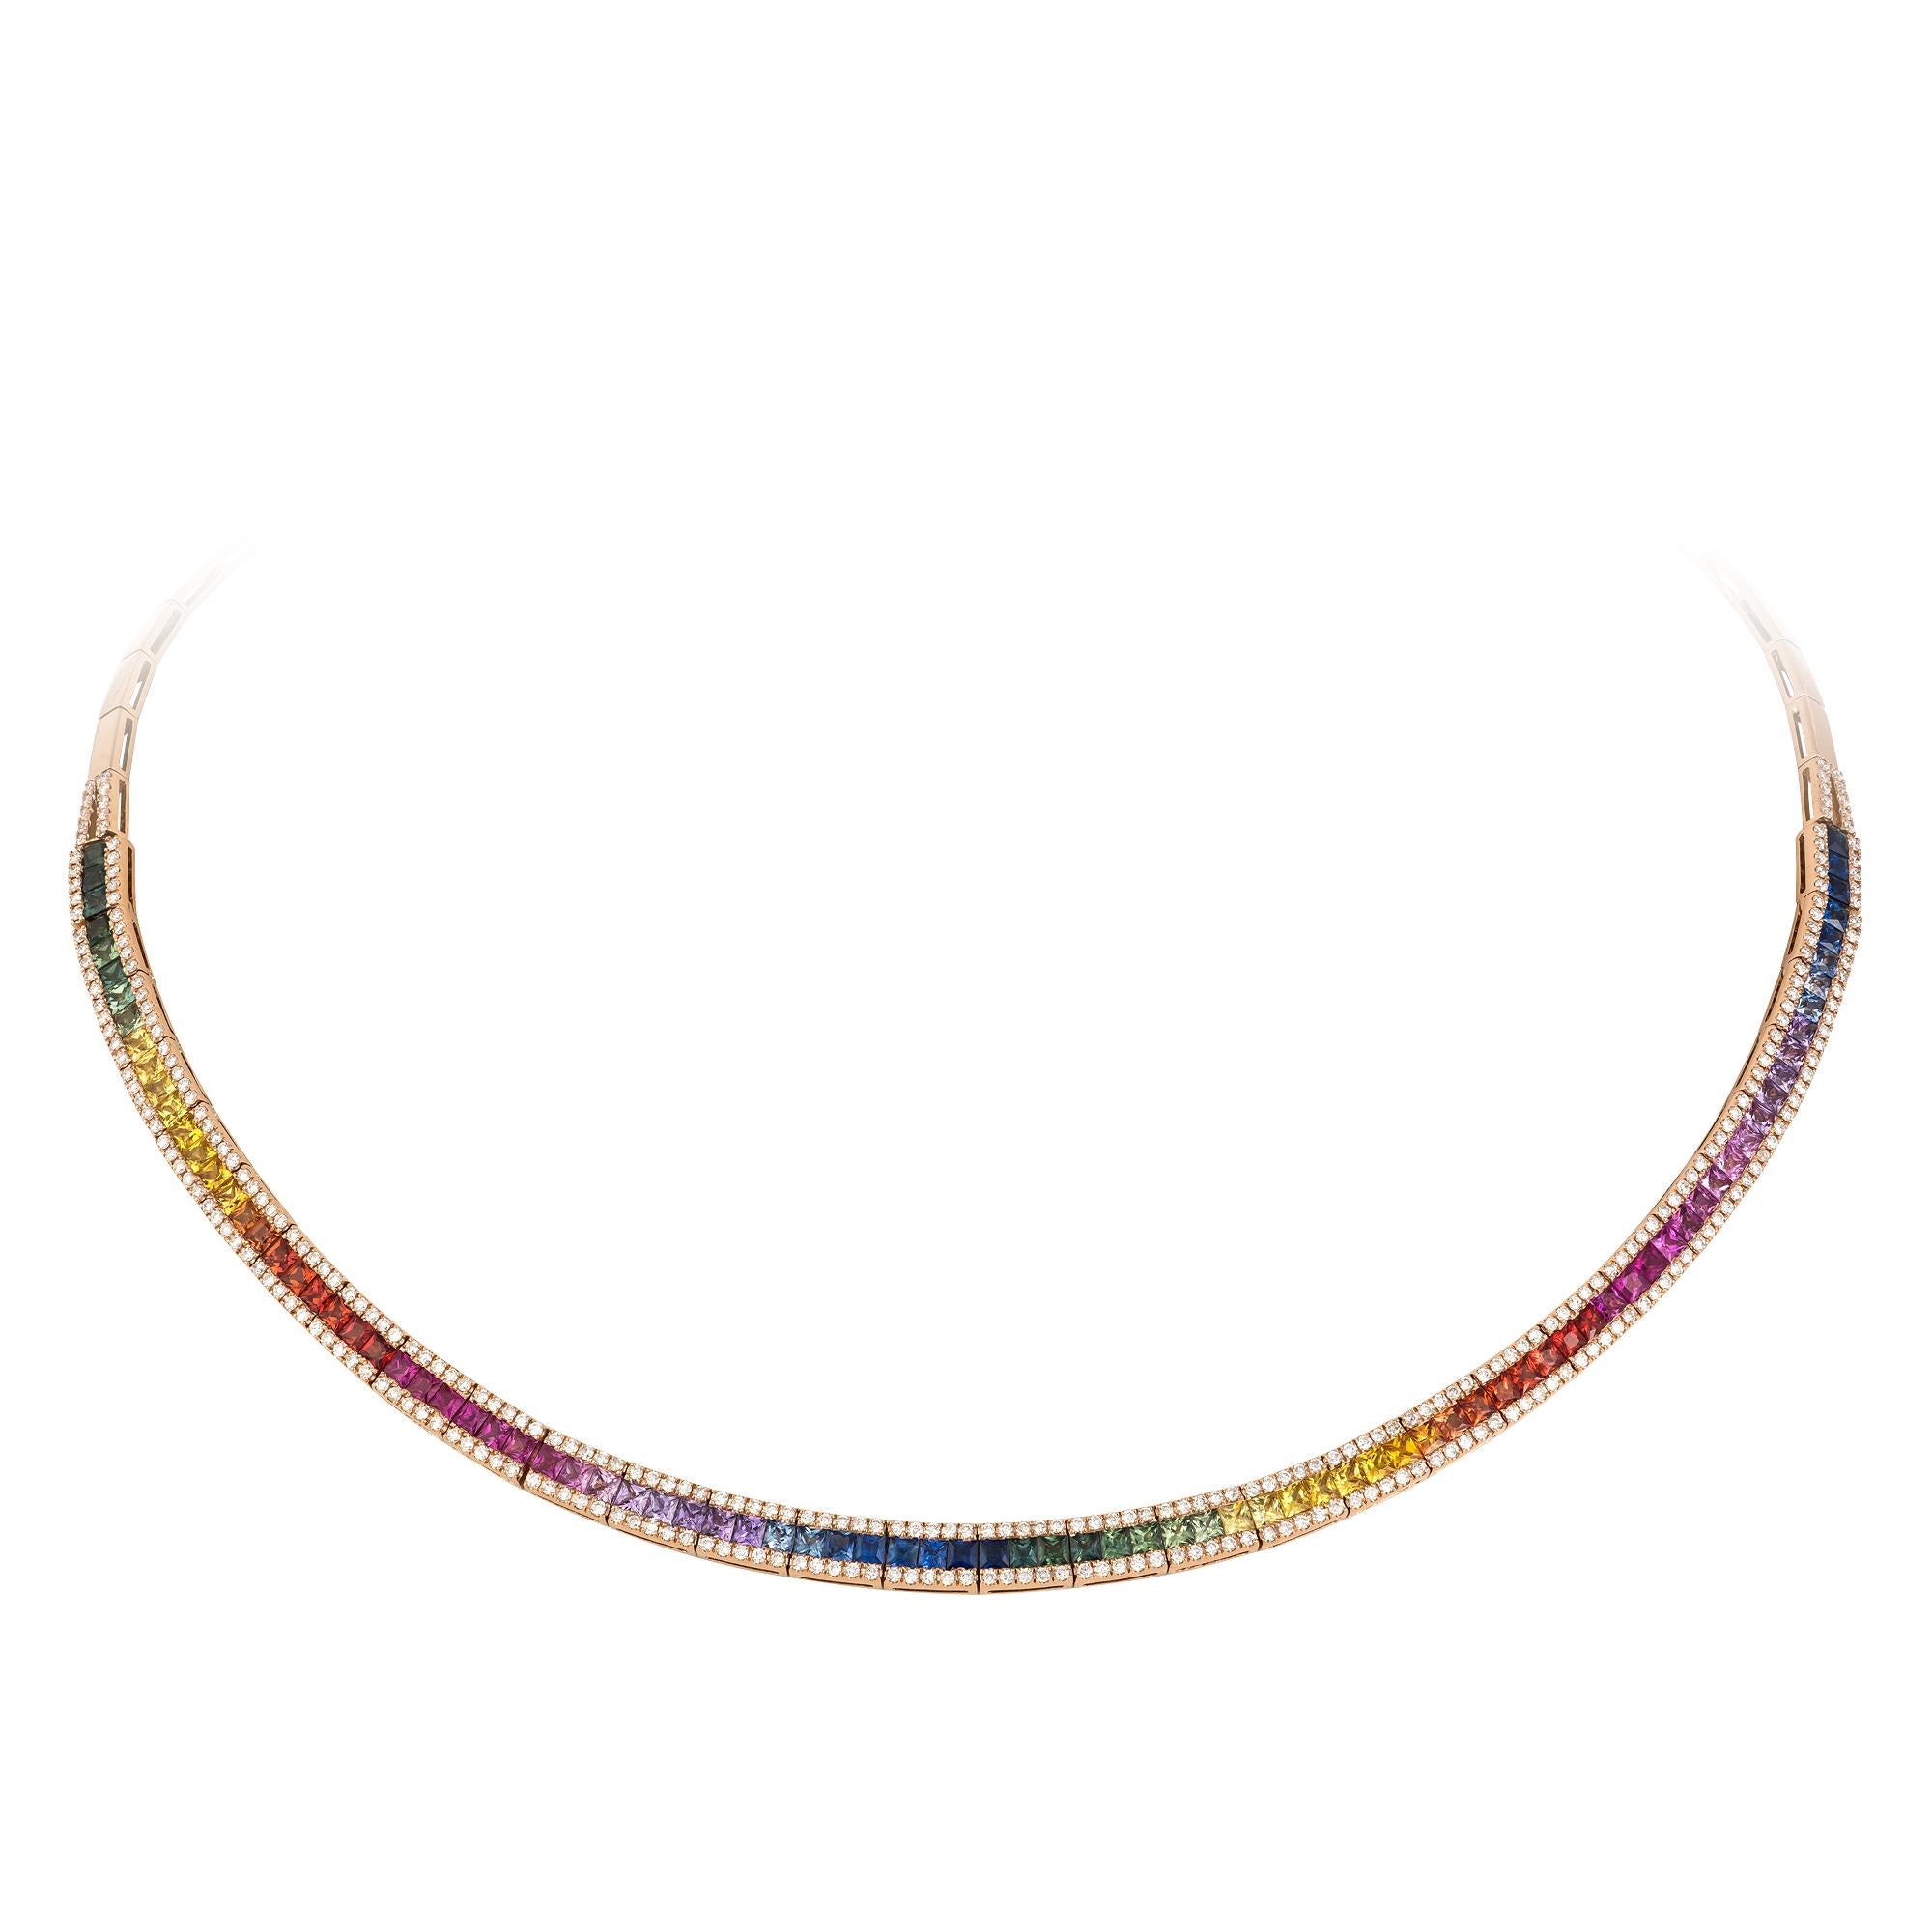 NECKLACE 18K Rose Gold 
Diamond 1.90 Cts/320 Pcs 
Multi Sapphire 10.35 Cts/91 Pcs

With a heritage of ancient fine Swiss jewelry traditions, NATKINA is a Geneva based jewellery brand, which creates modern jewellery masterpieces suitable for every